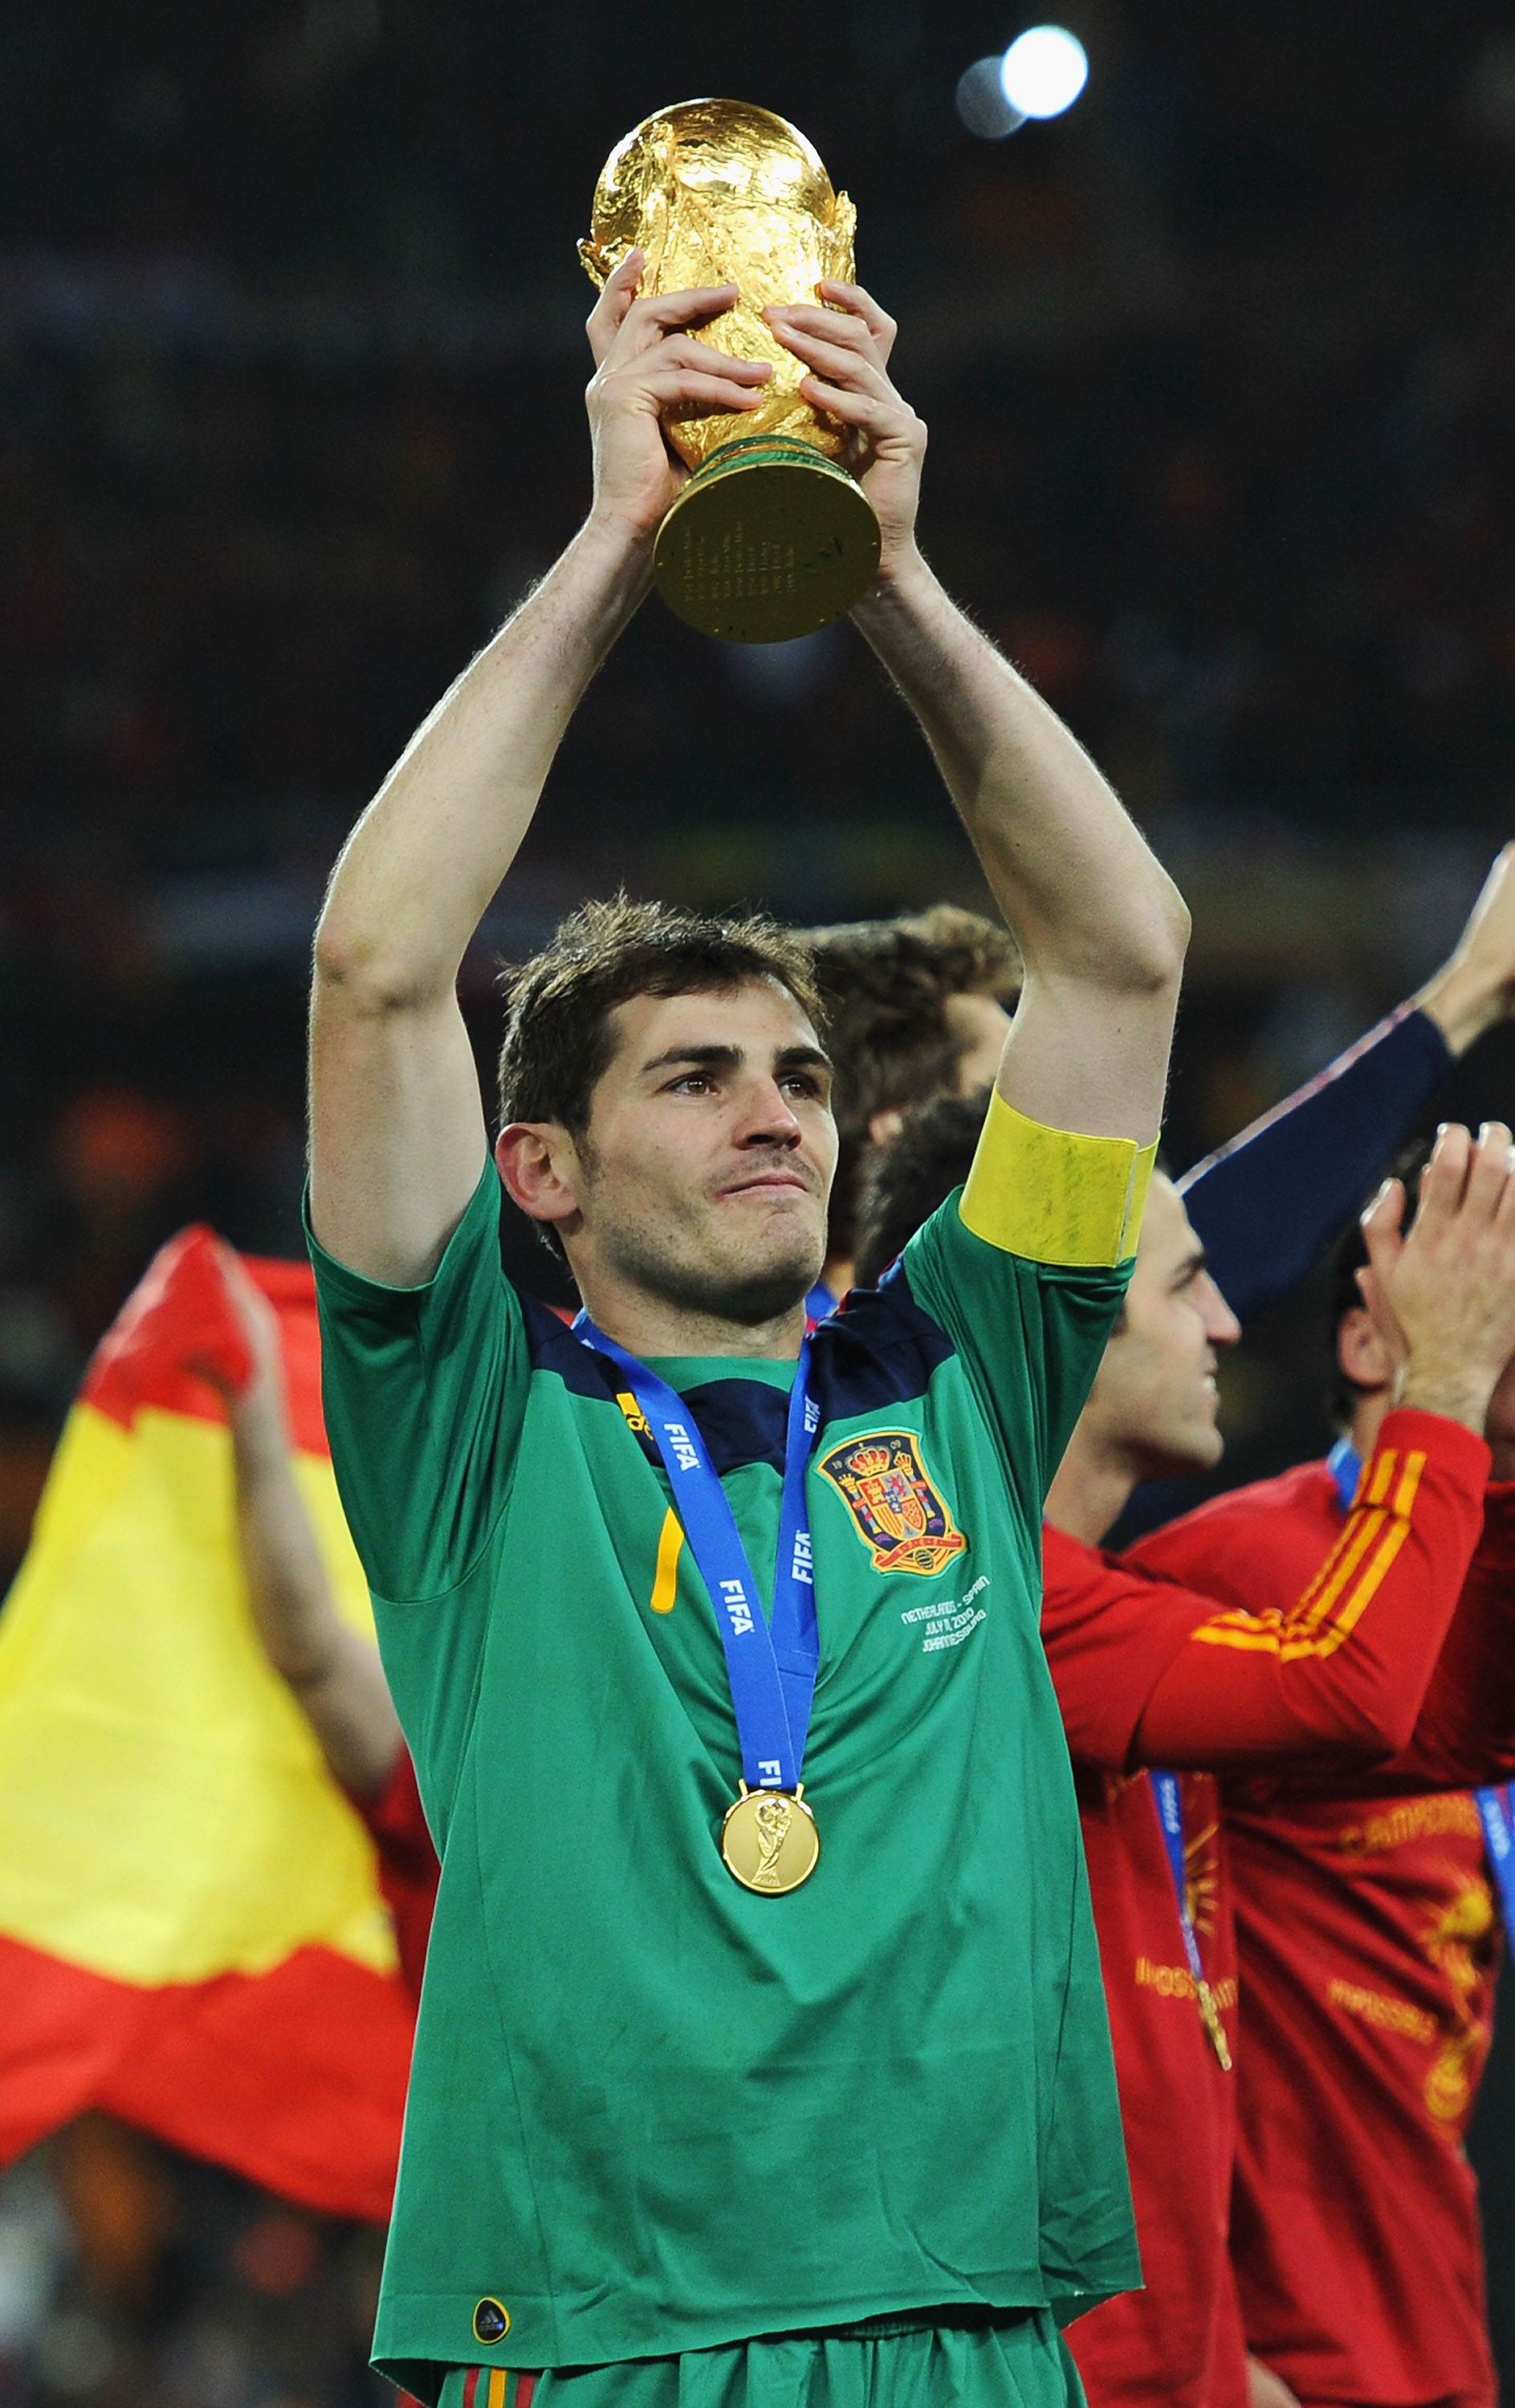 JOHANNESBURG, SOUTH AFRICA - JULY 11: Iker Casillas of Spain lifts the World Cup trophy as the Spain team celebrate victory following the 2010 FIFA World Cup South Africa Final match between Netherlands and Spain at Soccer City Stadium on July 11, 2010 in